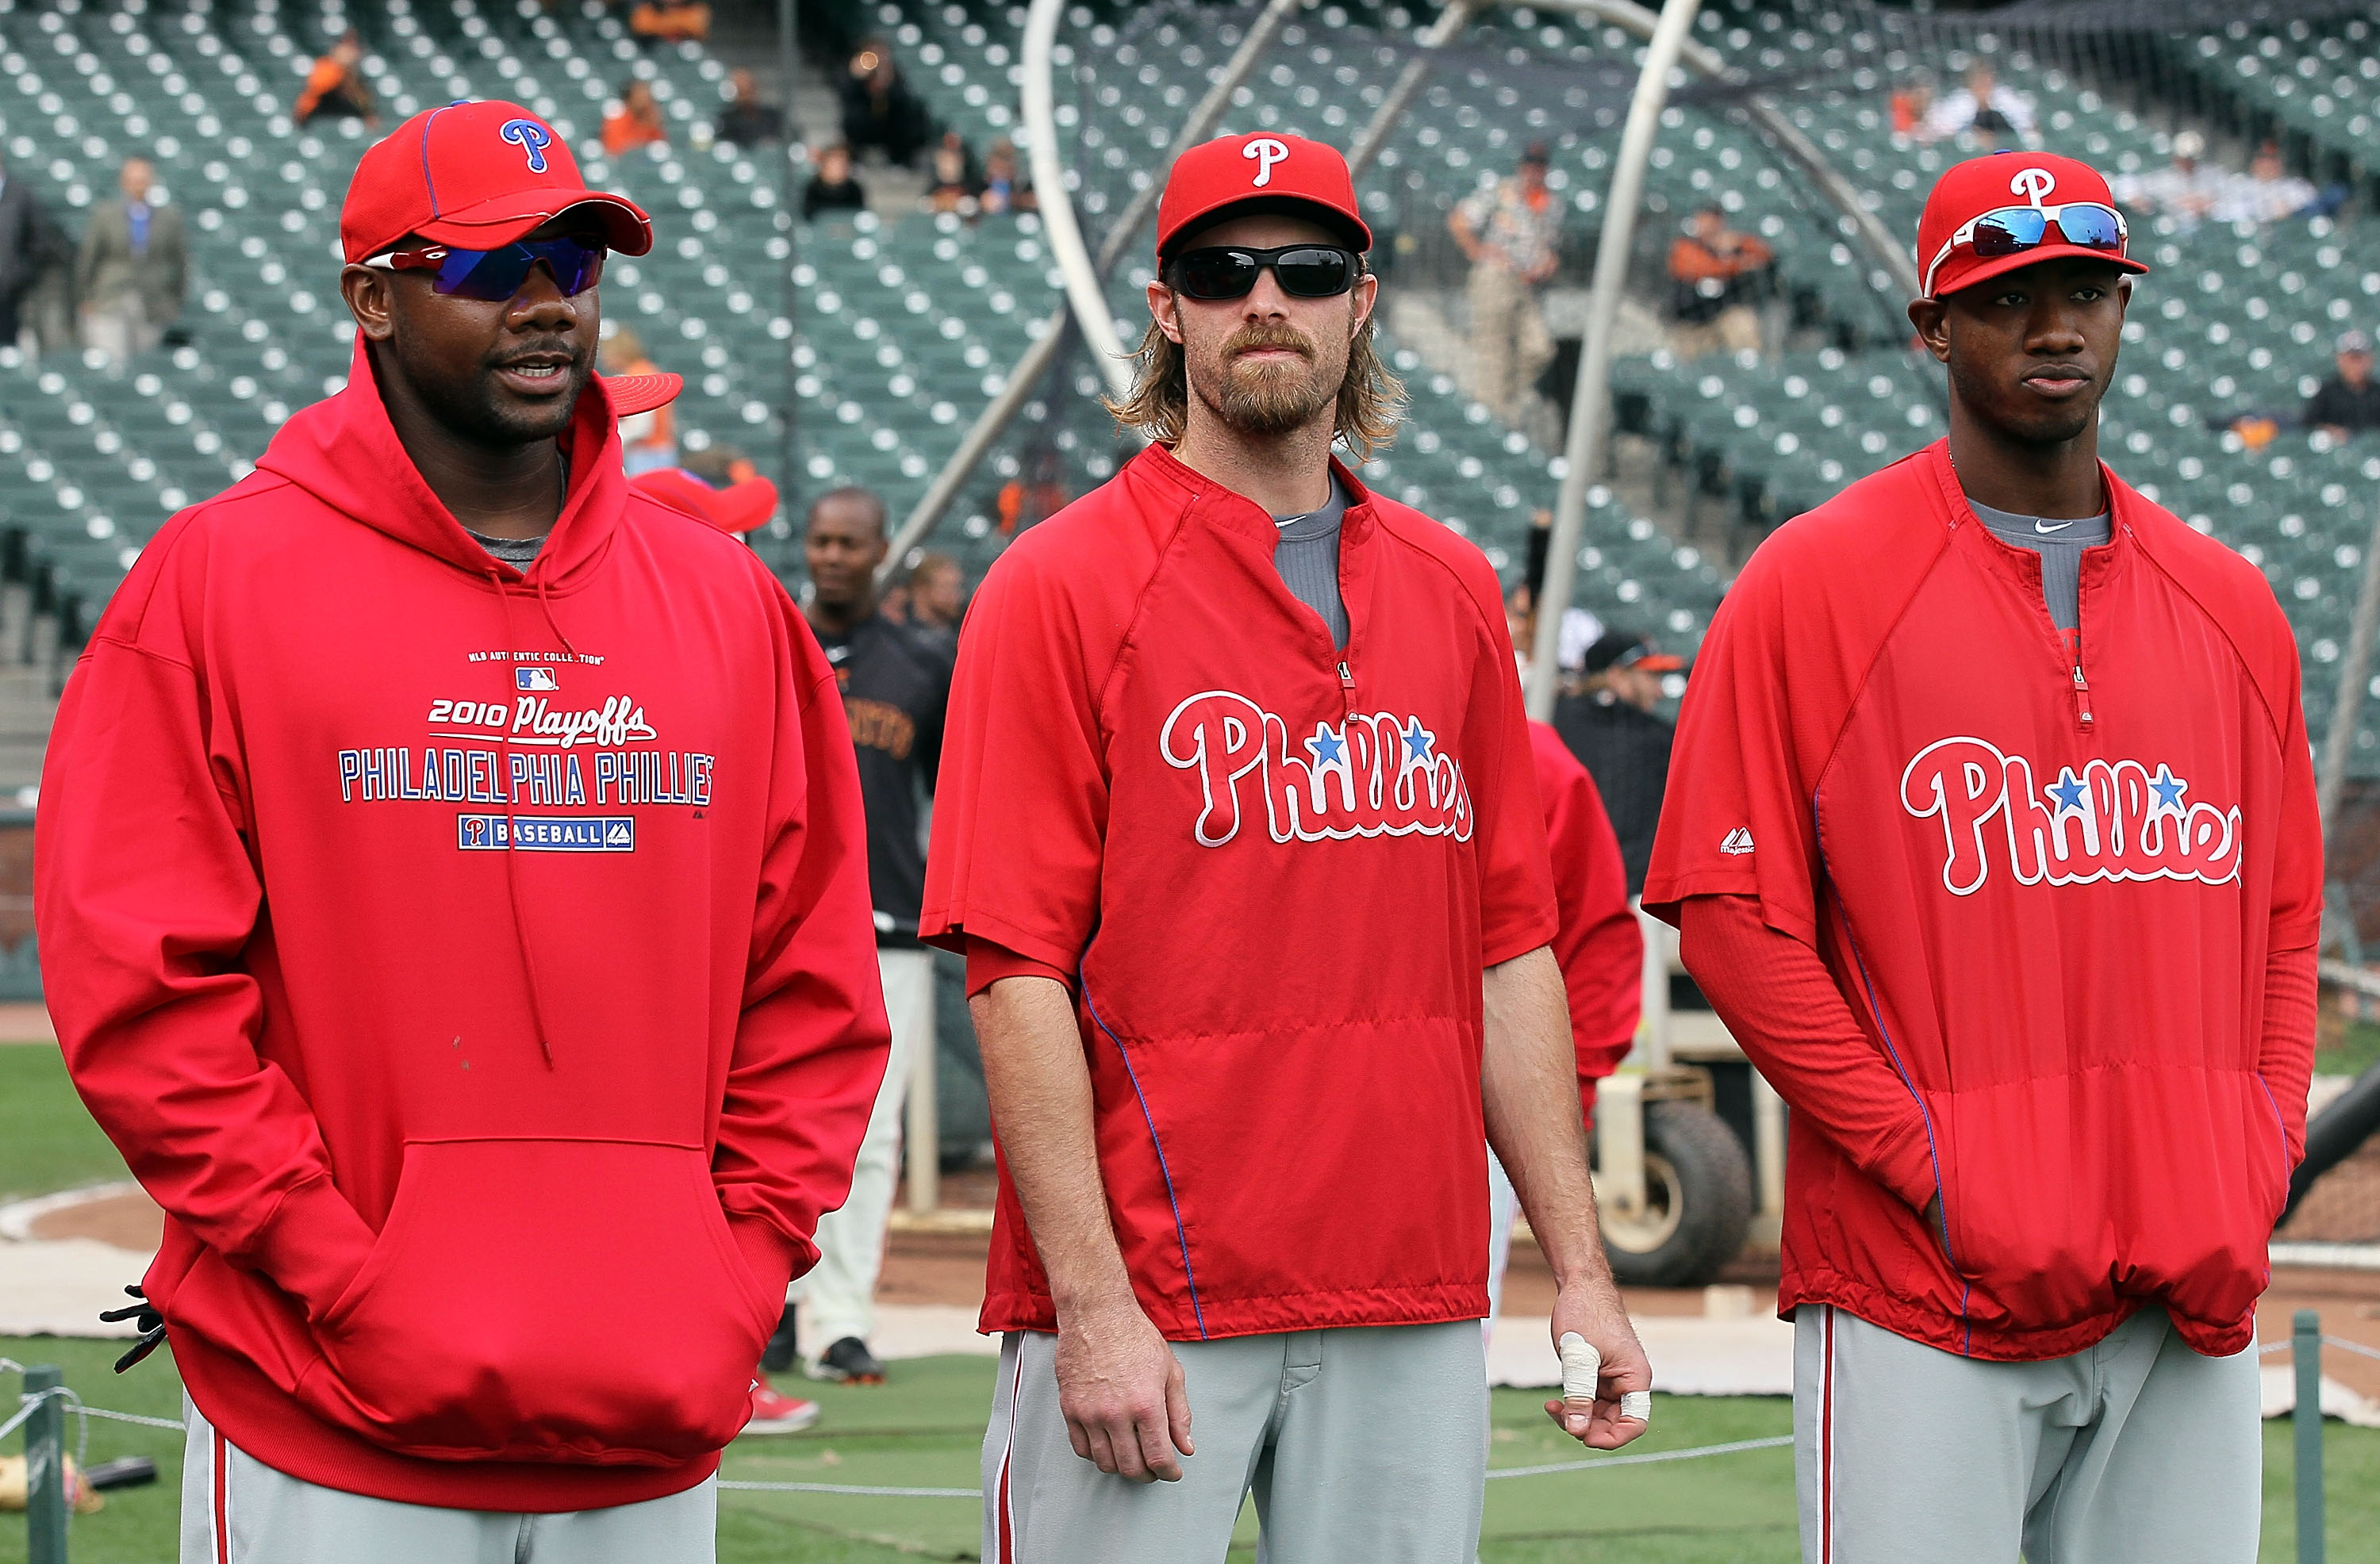 MLB Rumors: 5 Reasons Why We Were Wrong About Jayson Werth